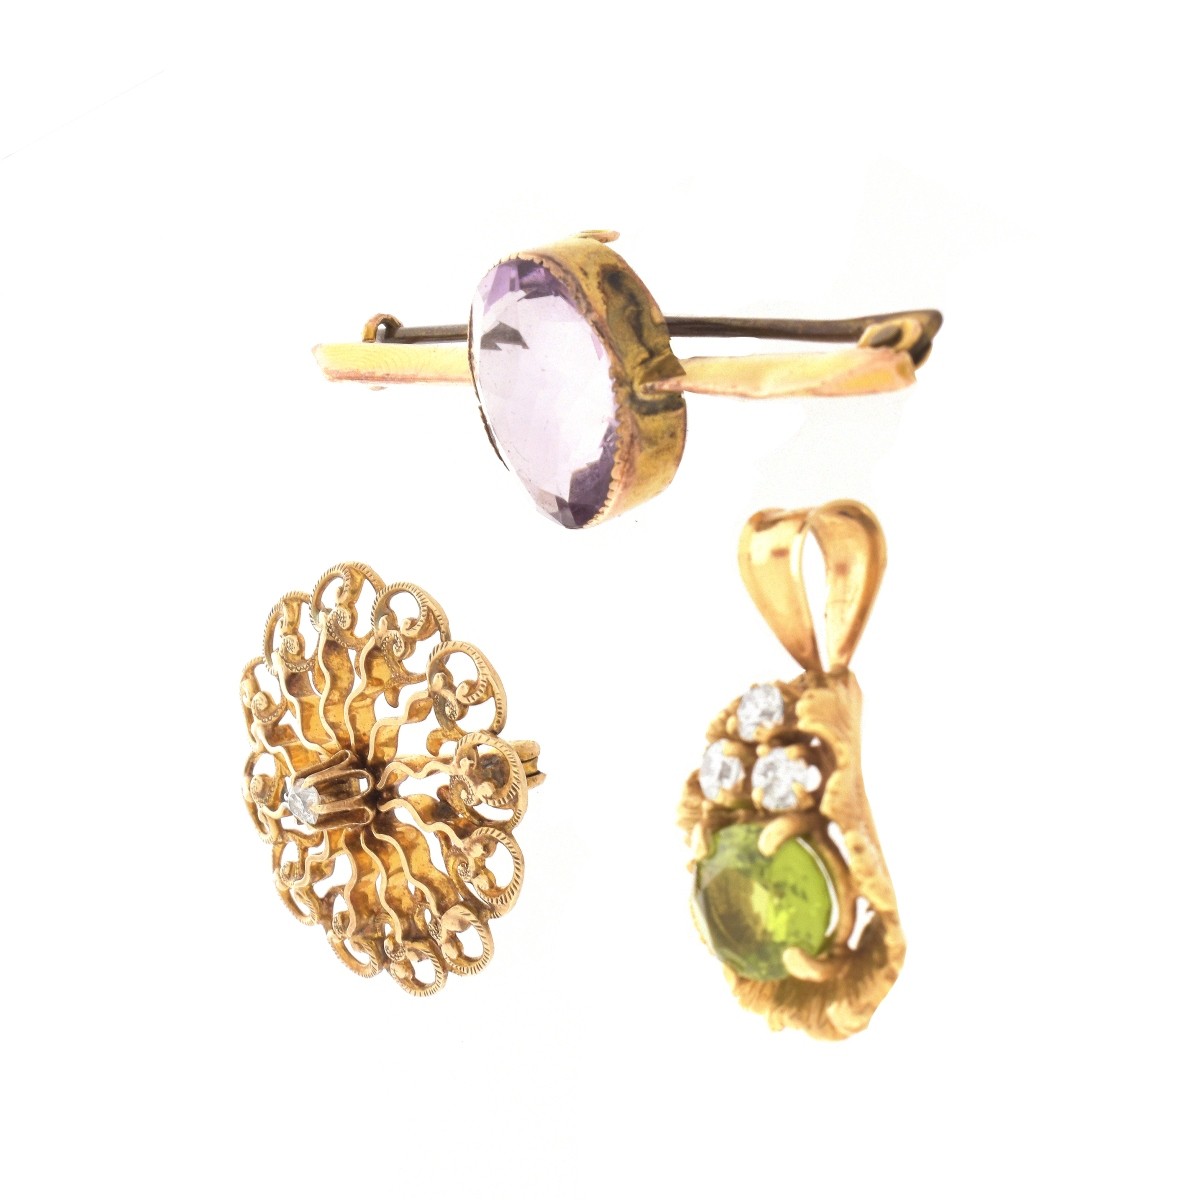 Two Gold and Gemstone Pins, One Pendant